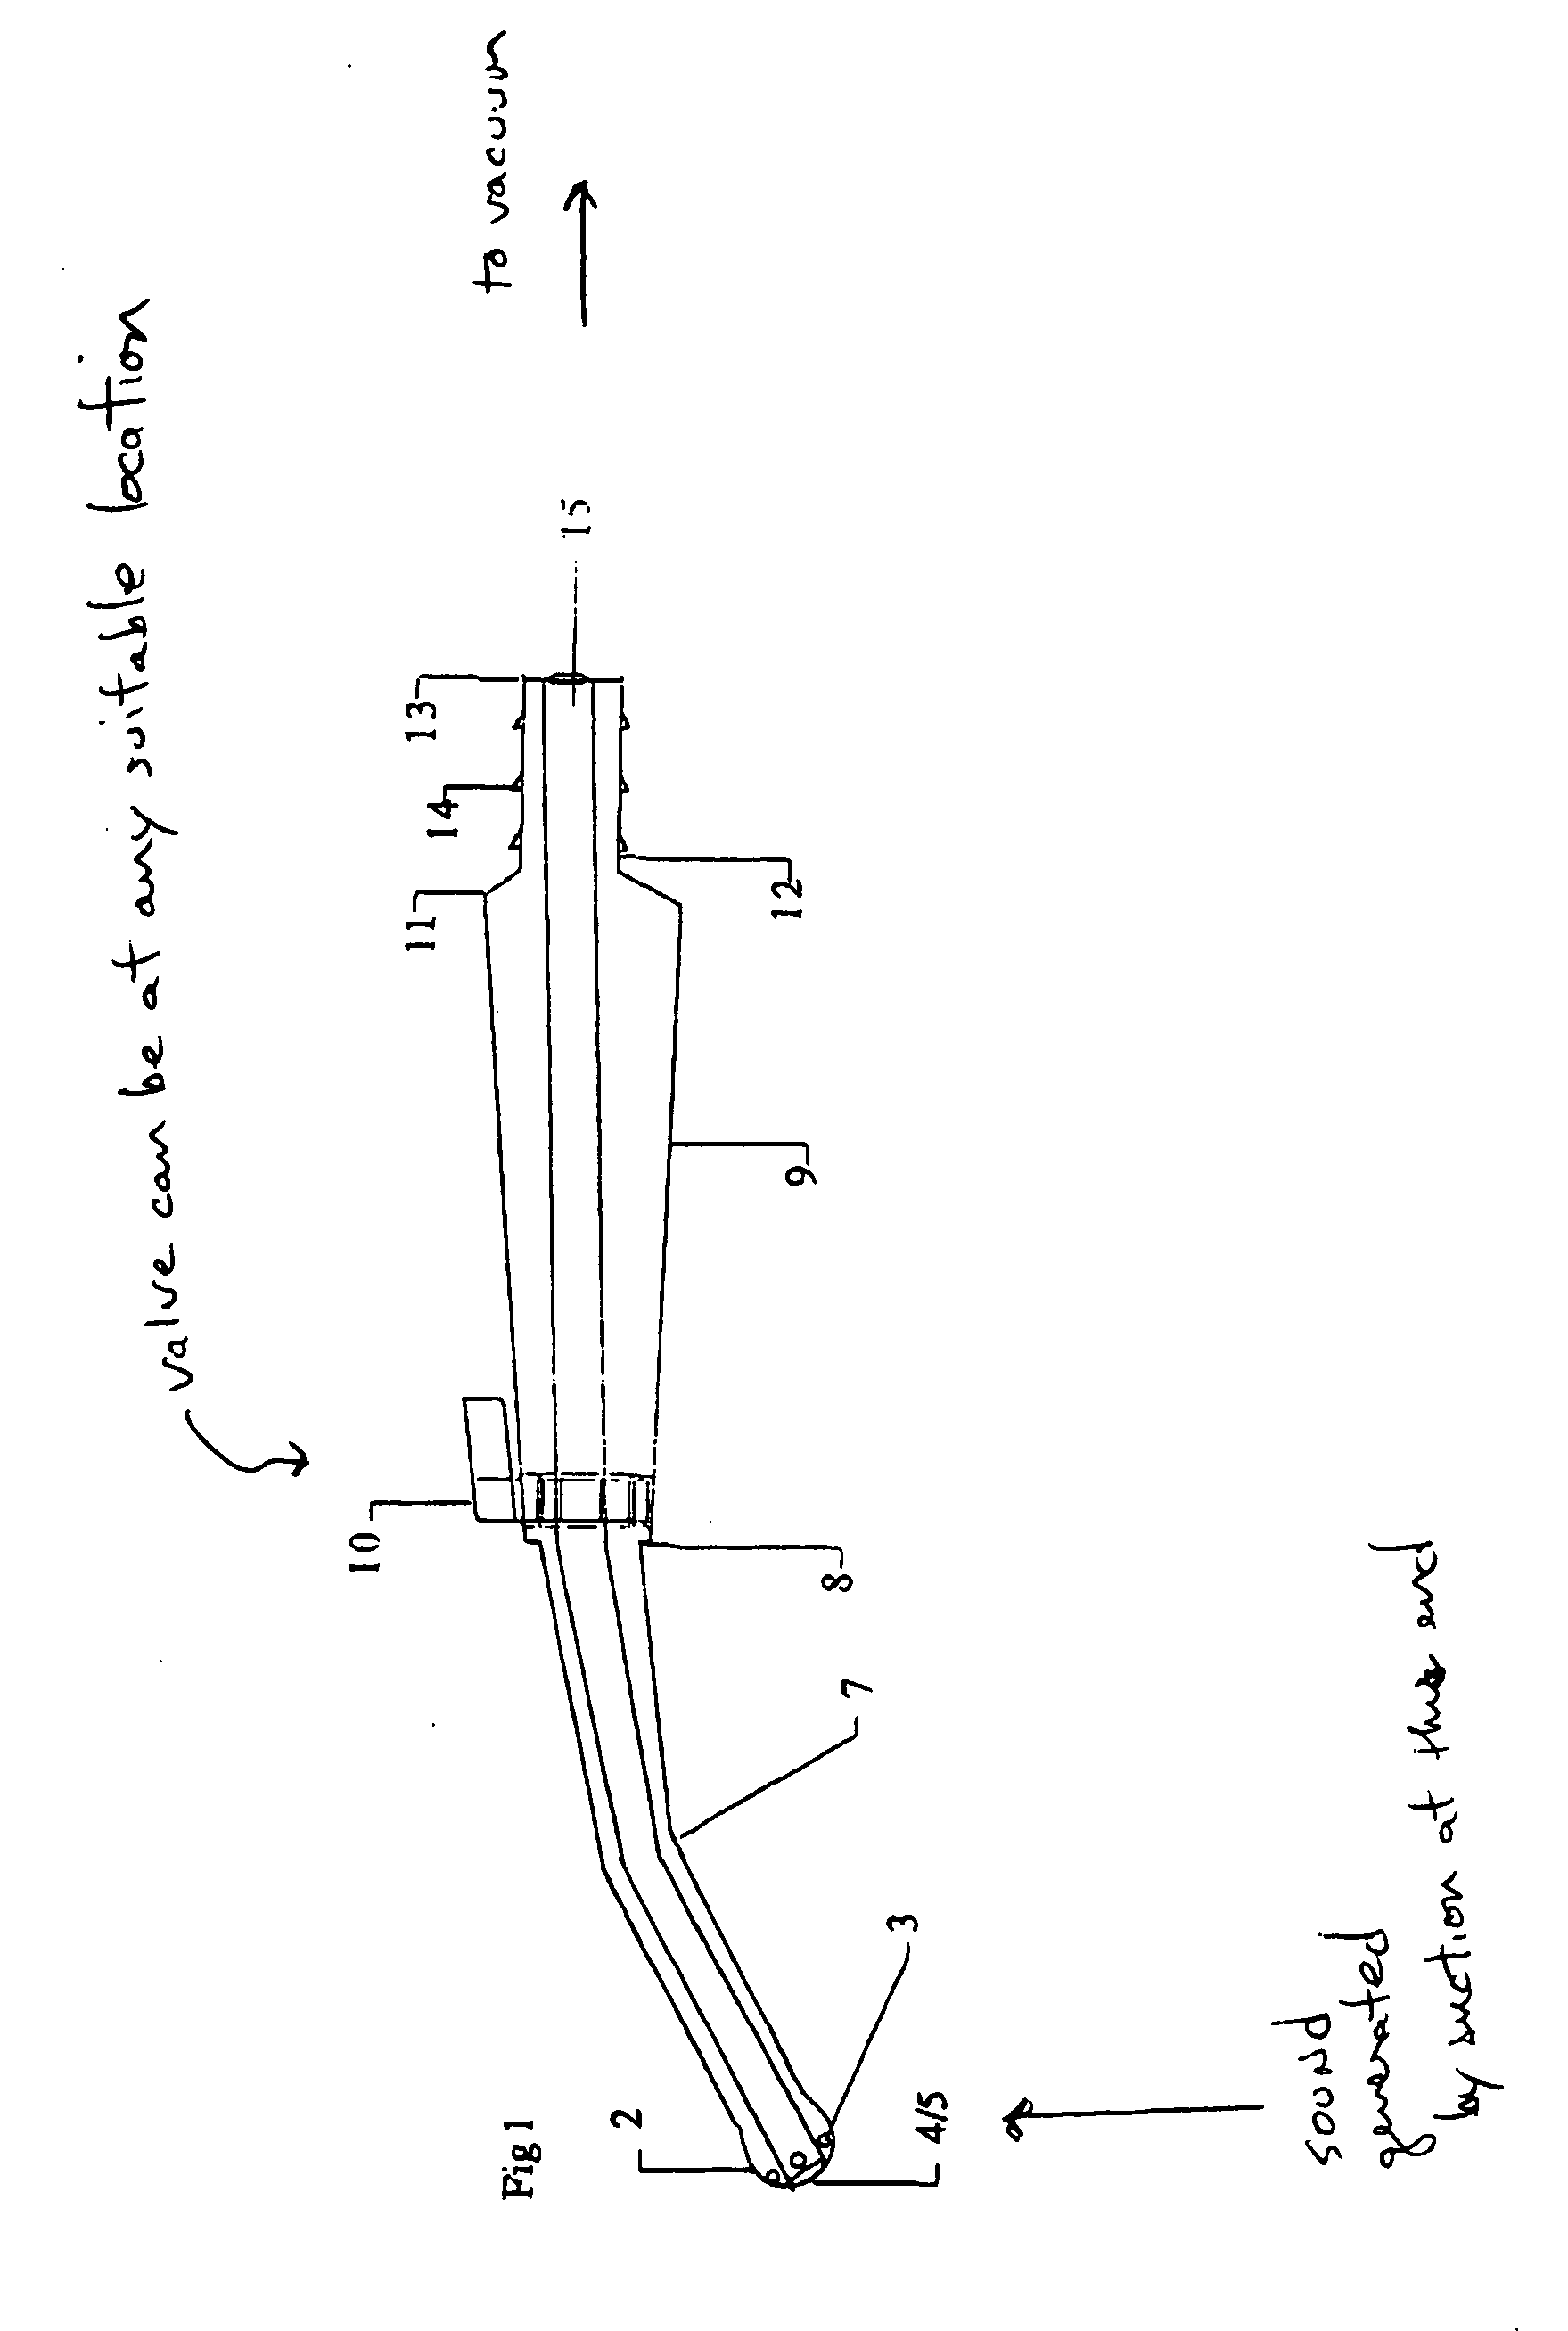 Suction hand-piece device with variable control off/on valve